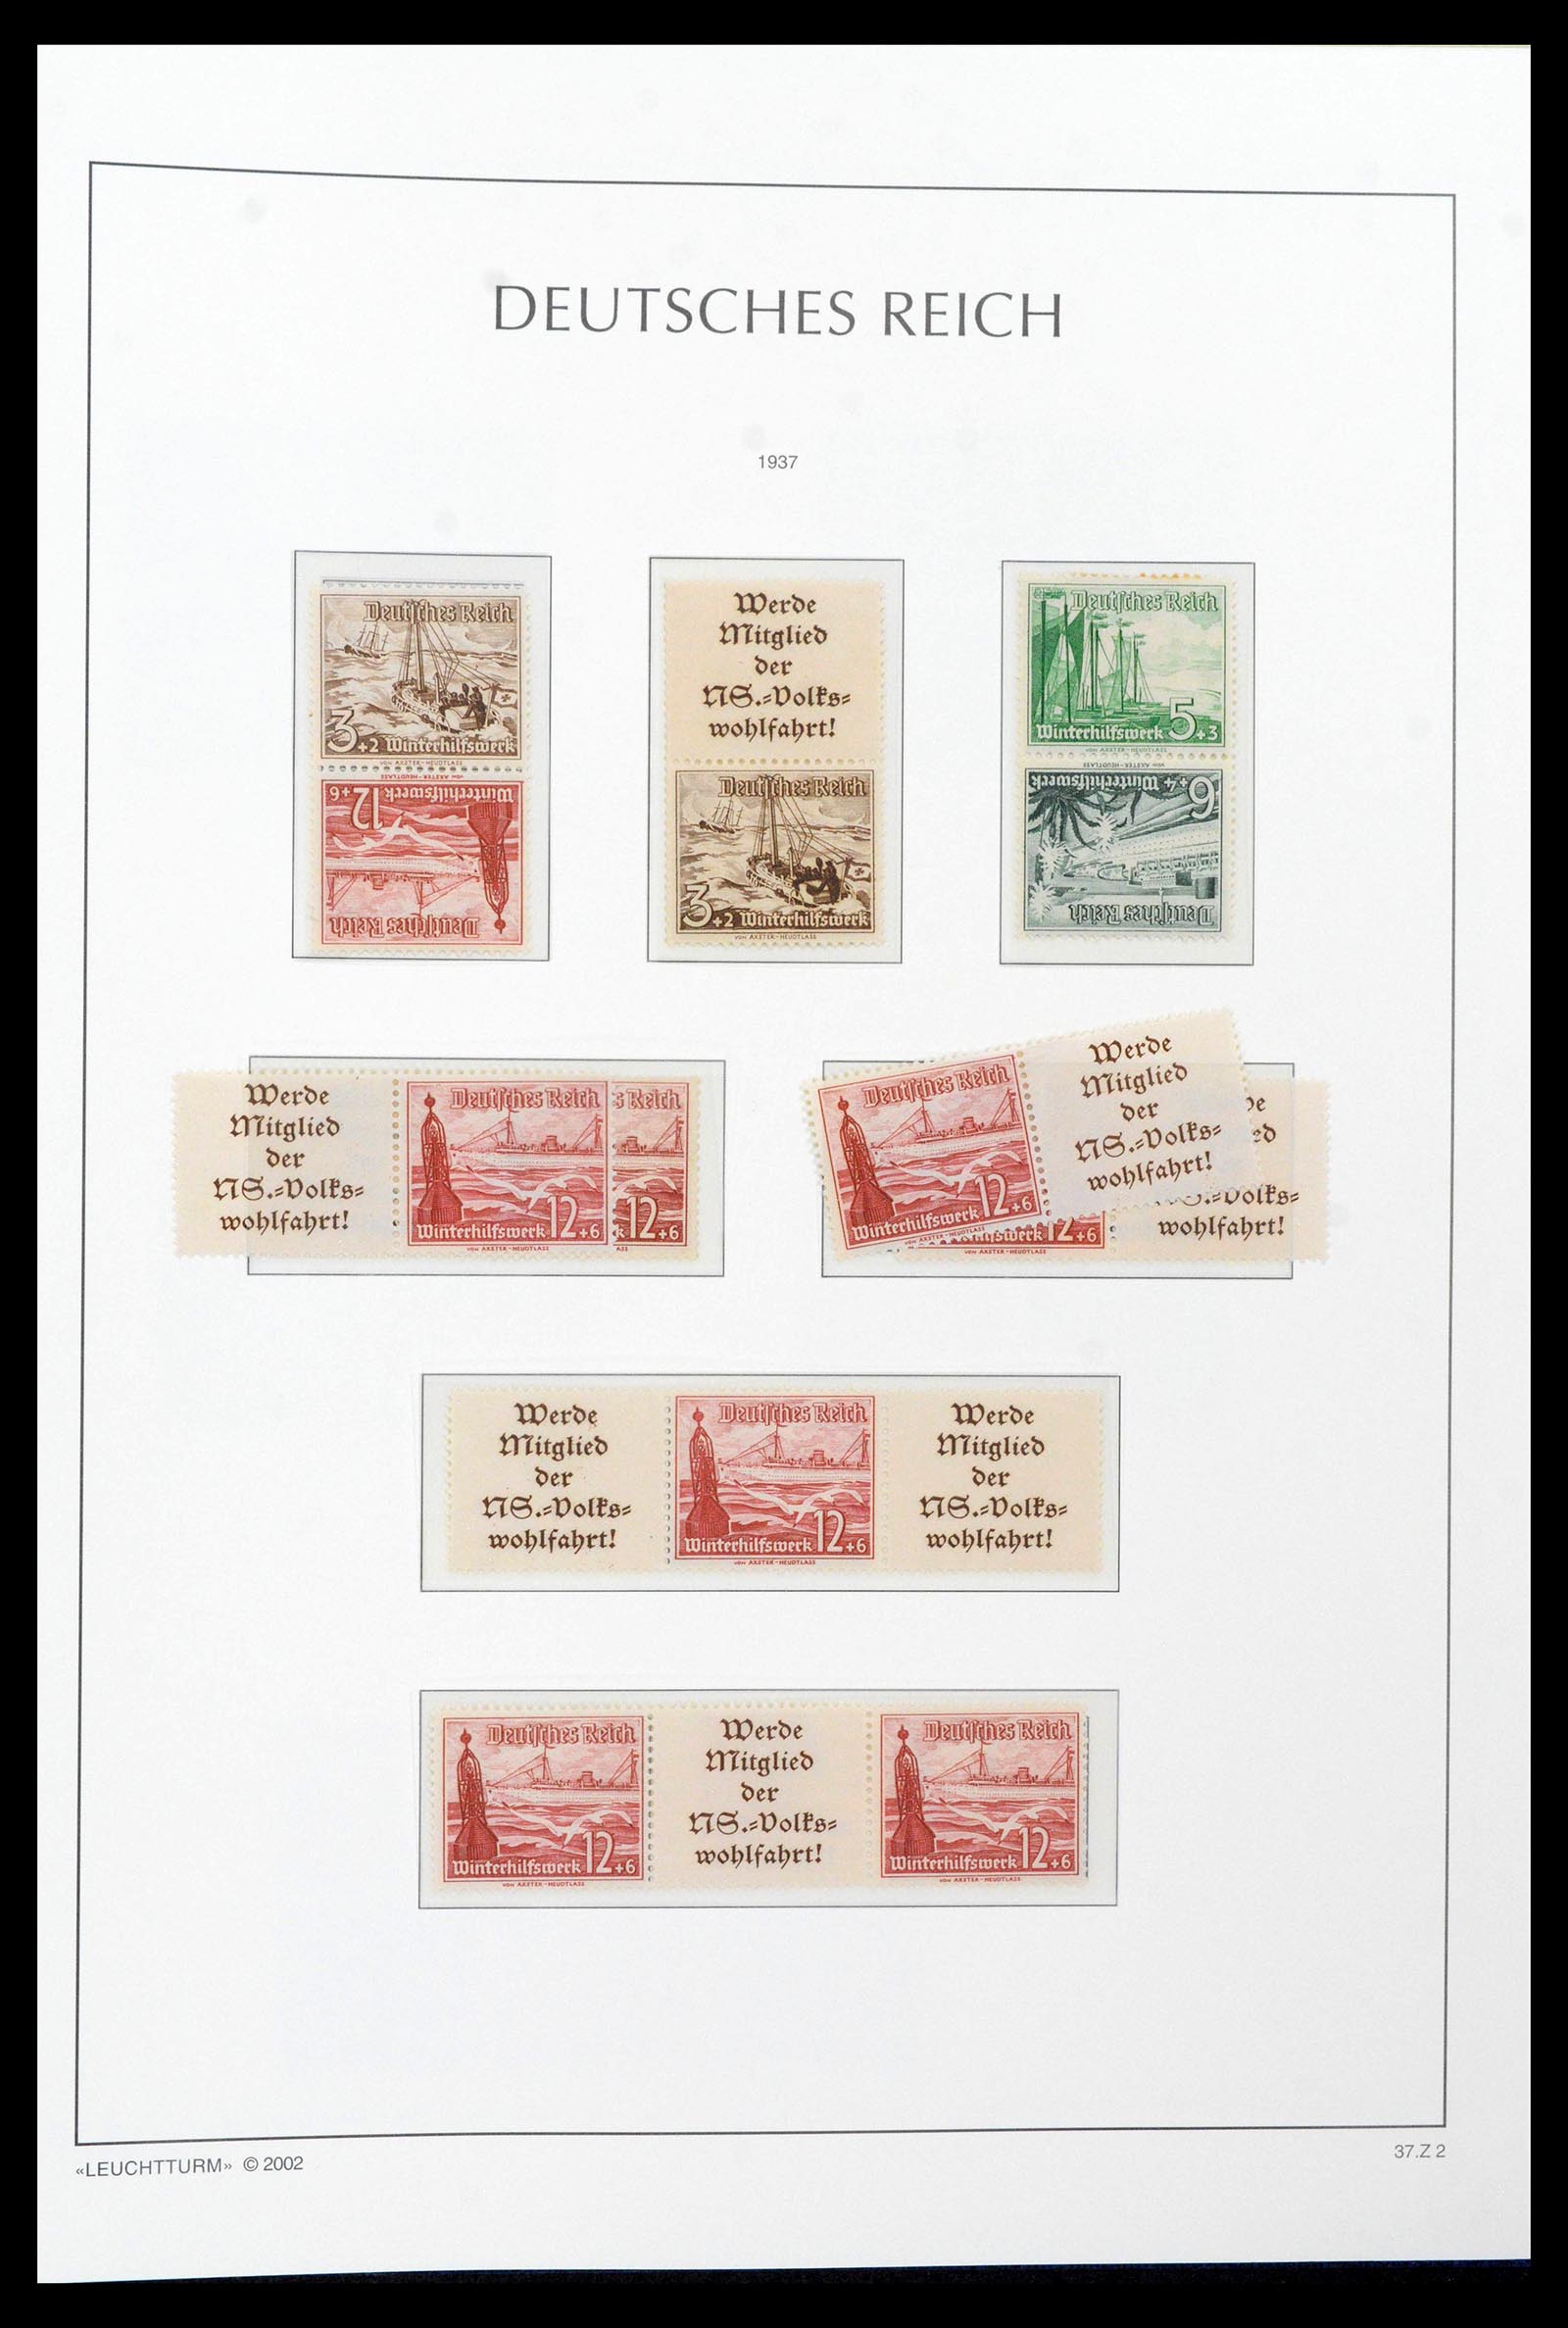 39045 0072 - Stamp collection 39045 German Reich combinations 1913-1941.